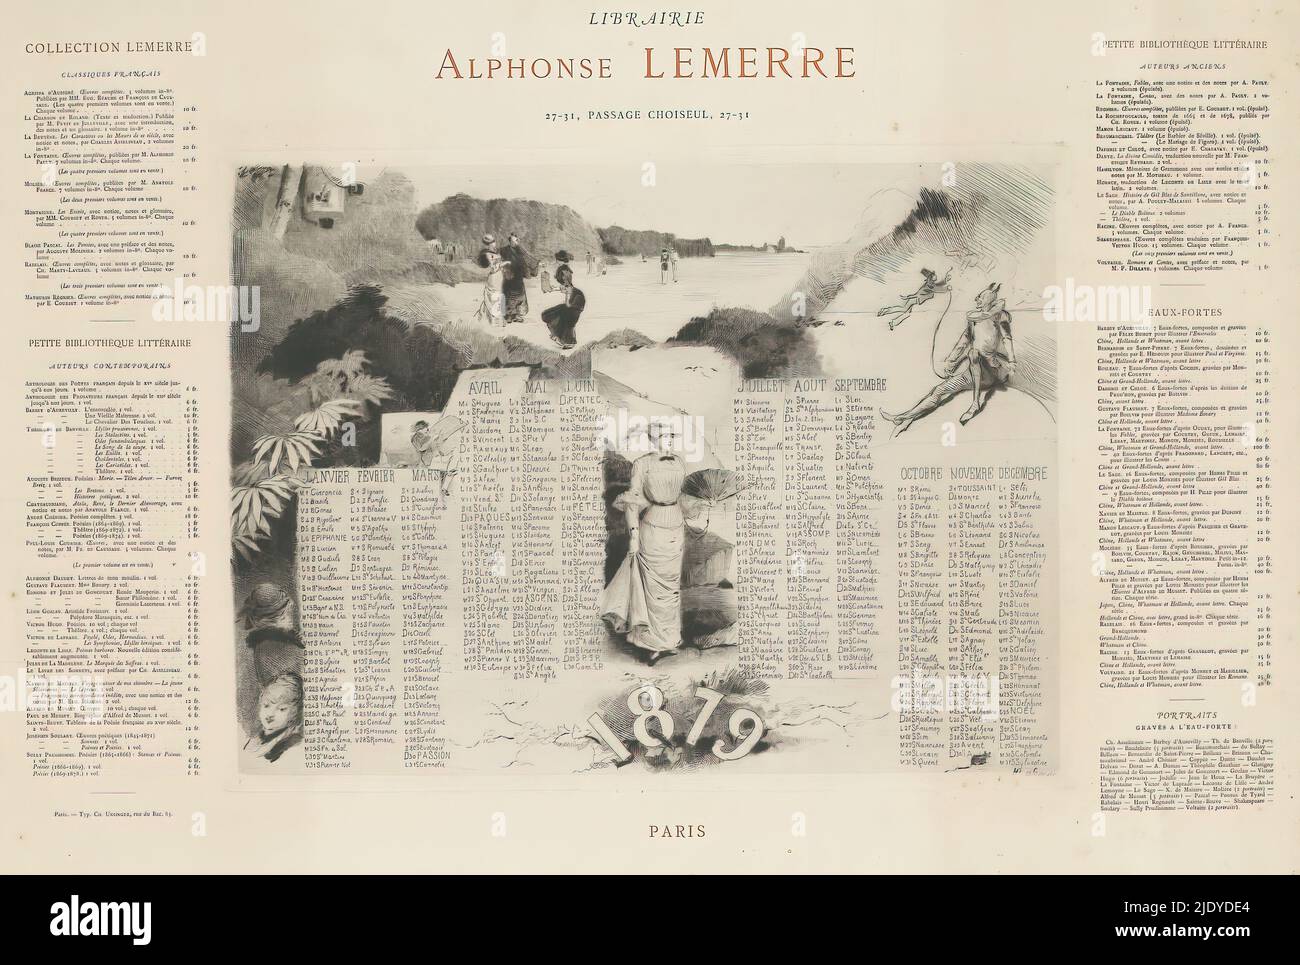 Calendar of Librairie Alphonse Lemerre for the year 1879, Walking figures in a landscape. Above a woman and a man in a kimono. He is handing another woman a lantern. In the center a coastal scene with a woman holding an unfolded fan. Top right a devil with a man with a hat on his tail., print maker: Henry Somm, (mentioned on object), printer: Ch. Unsinger, (mentioned on object), publisher: Alphonse Lemerre, (mentioned on object), Paris, 1878 - 1879, paper, etching, drypoint, letterpress printing, height 237 mm × width 319 mm, height 445 mm × width 550 mm Stock Photo